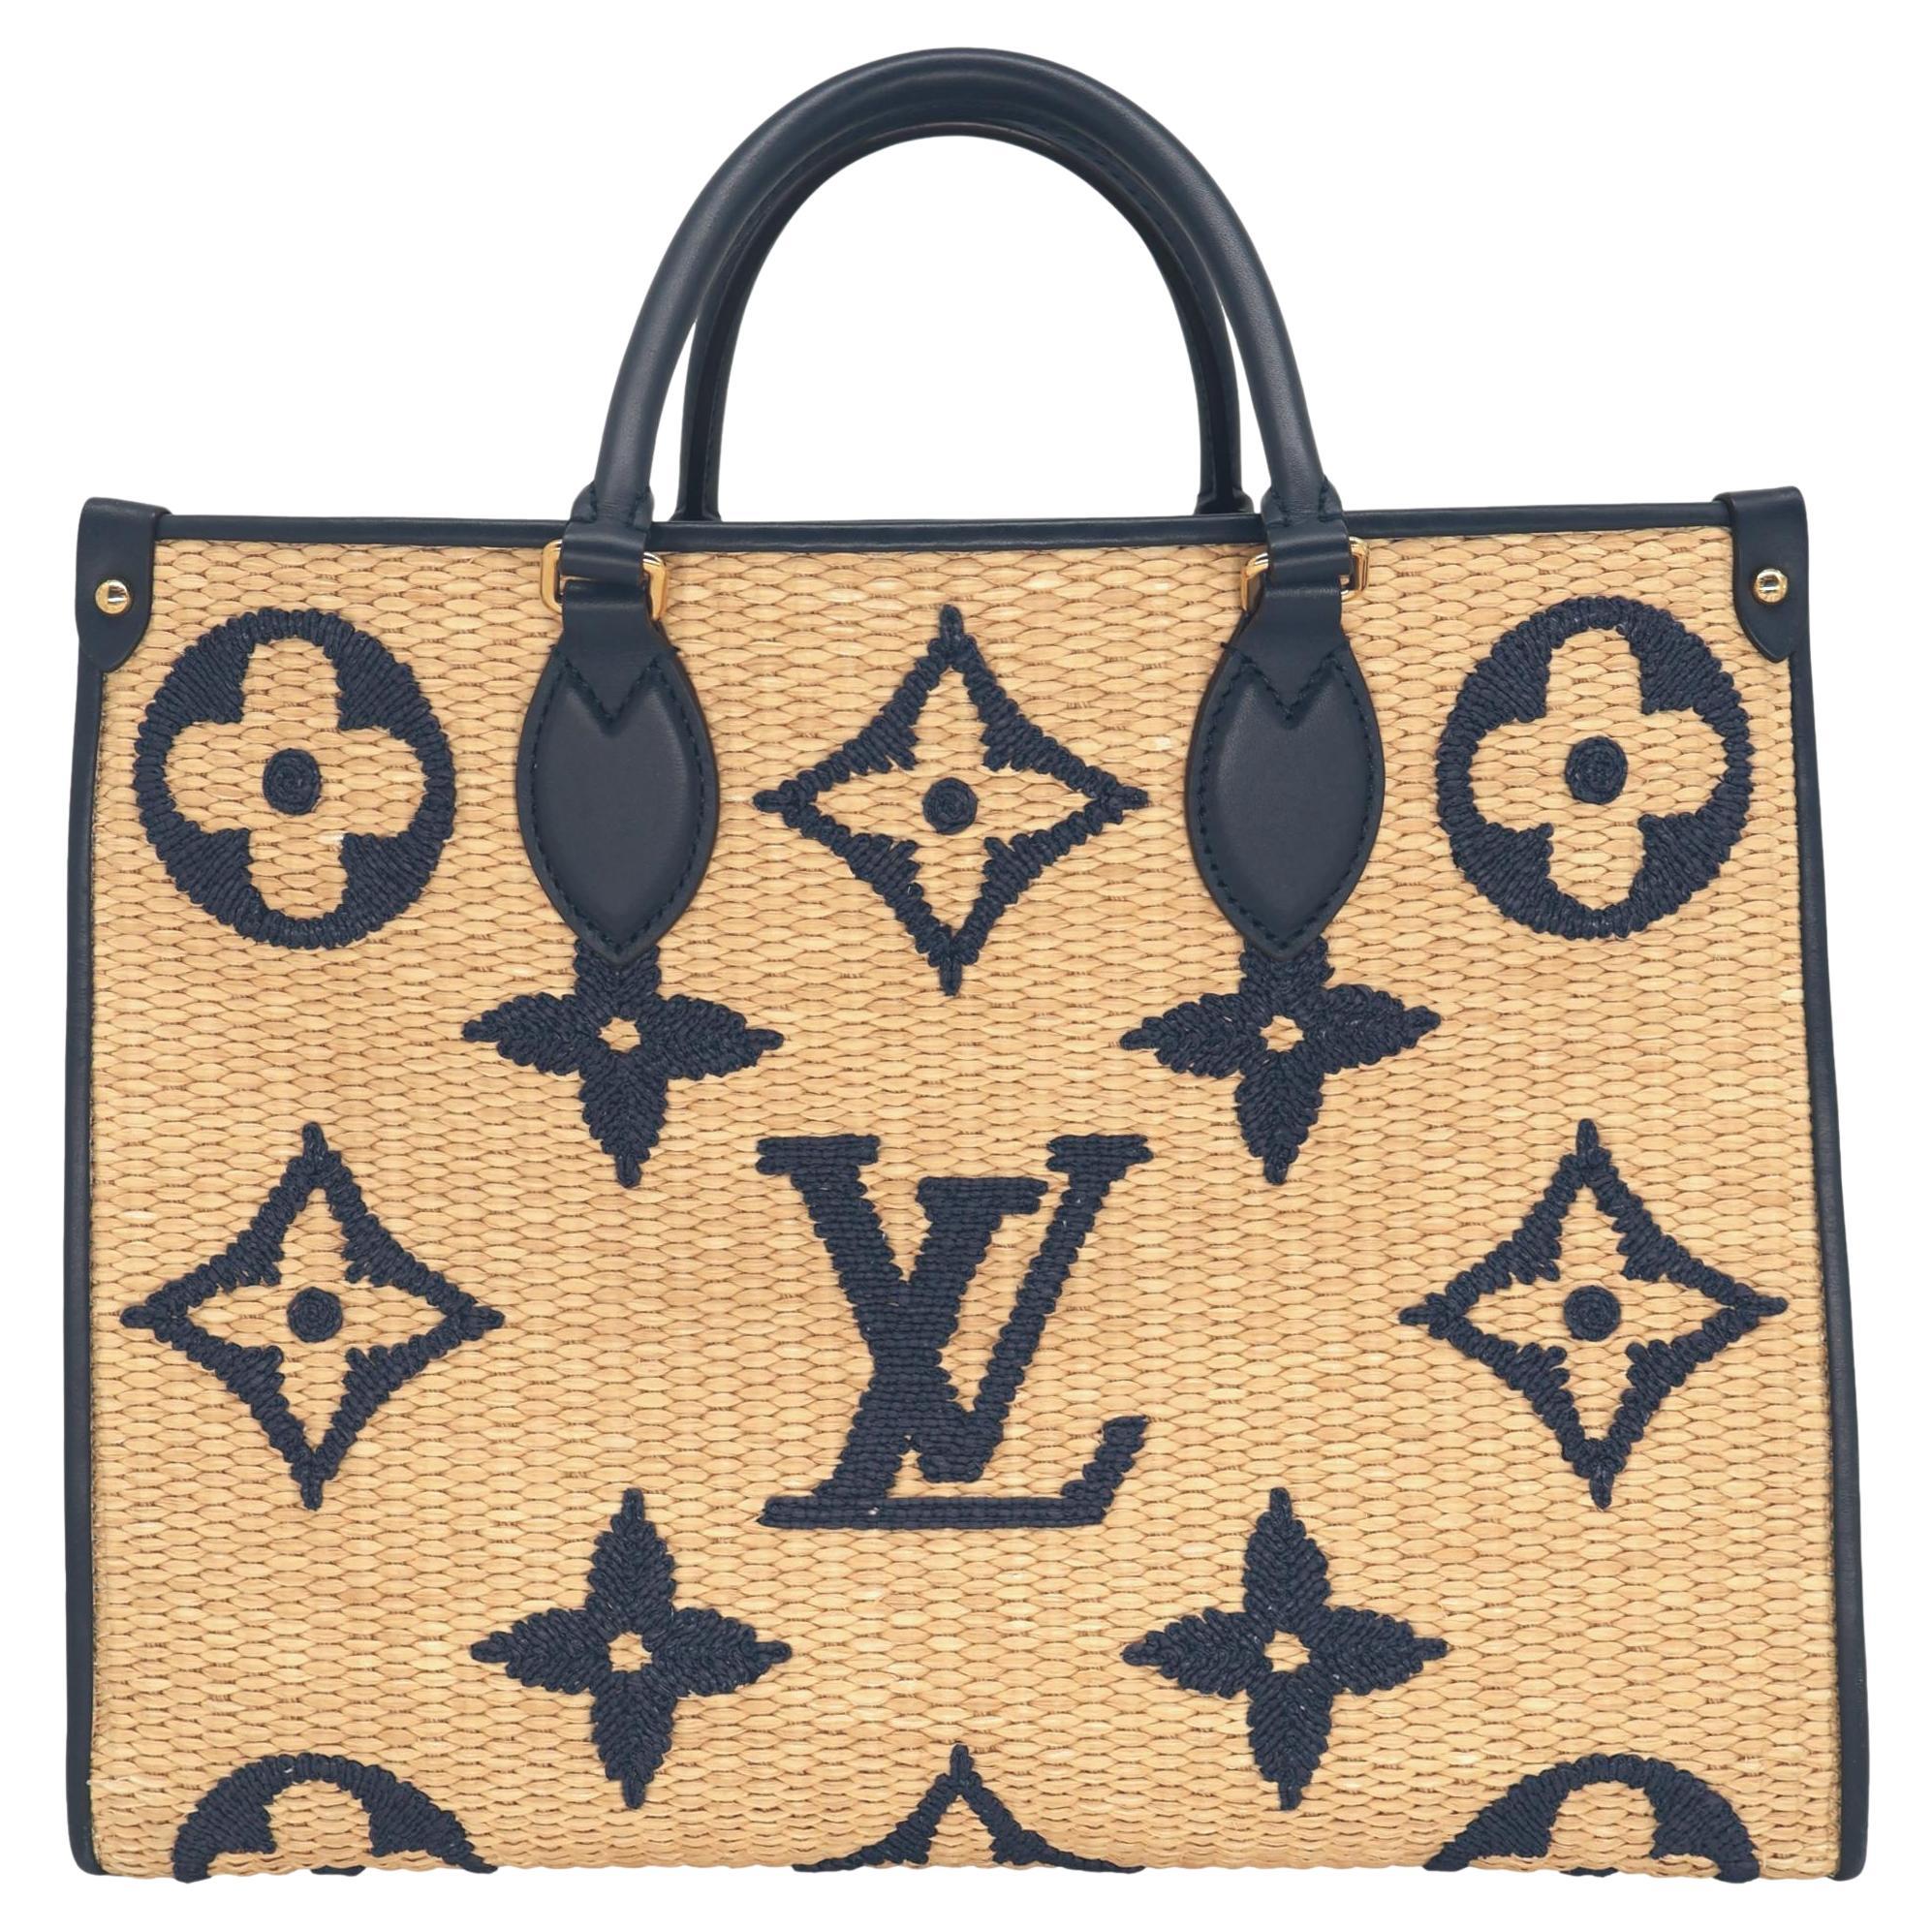 What size is a Louis Vuitton Totally MM?